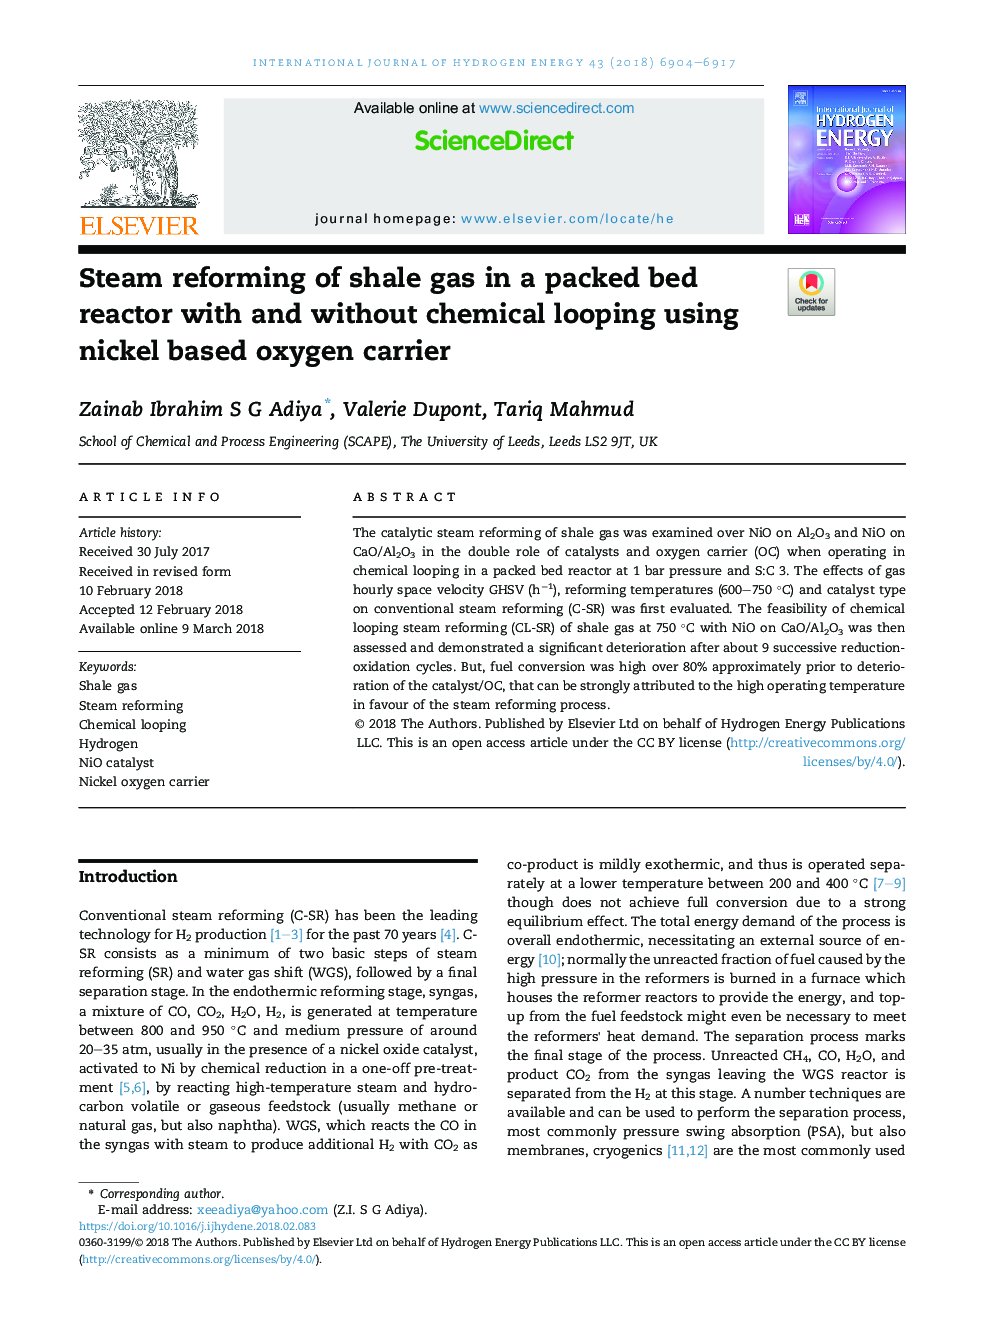 Steam reforming of shale gas in a packed bed reactor with and without chemical looping using nickel based oxygen carrier